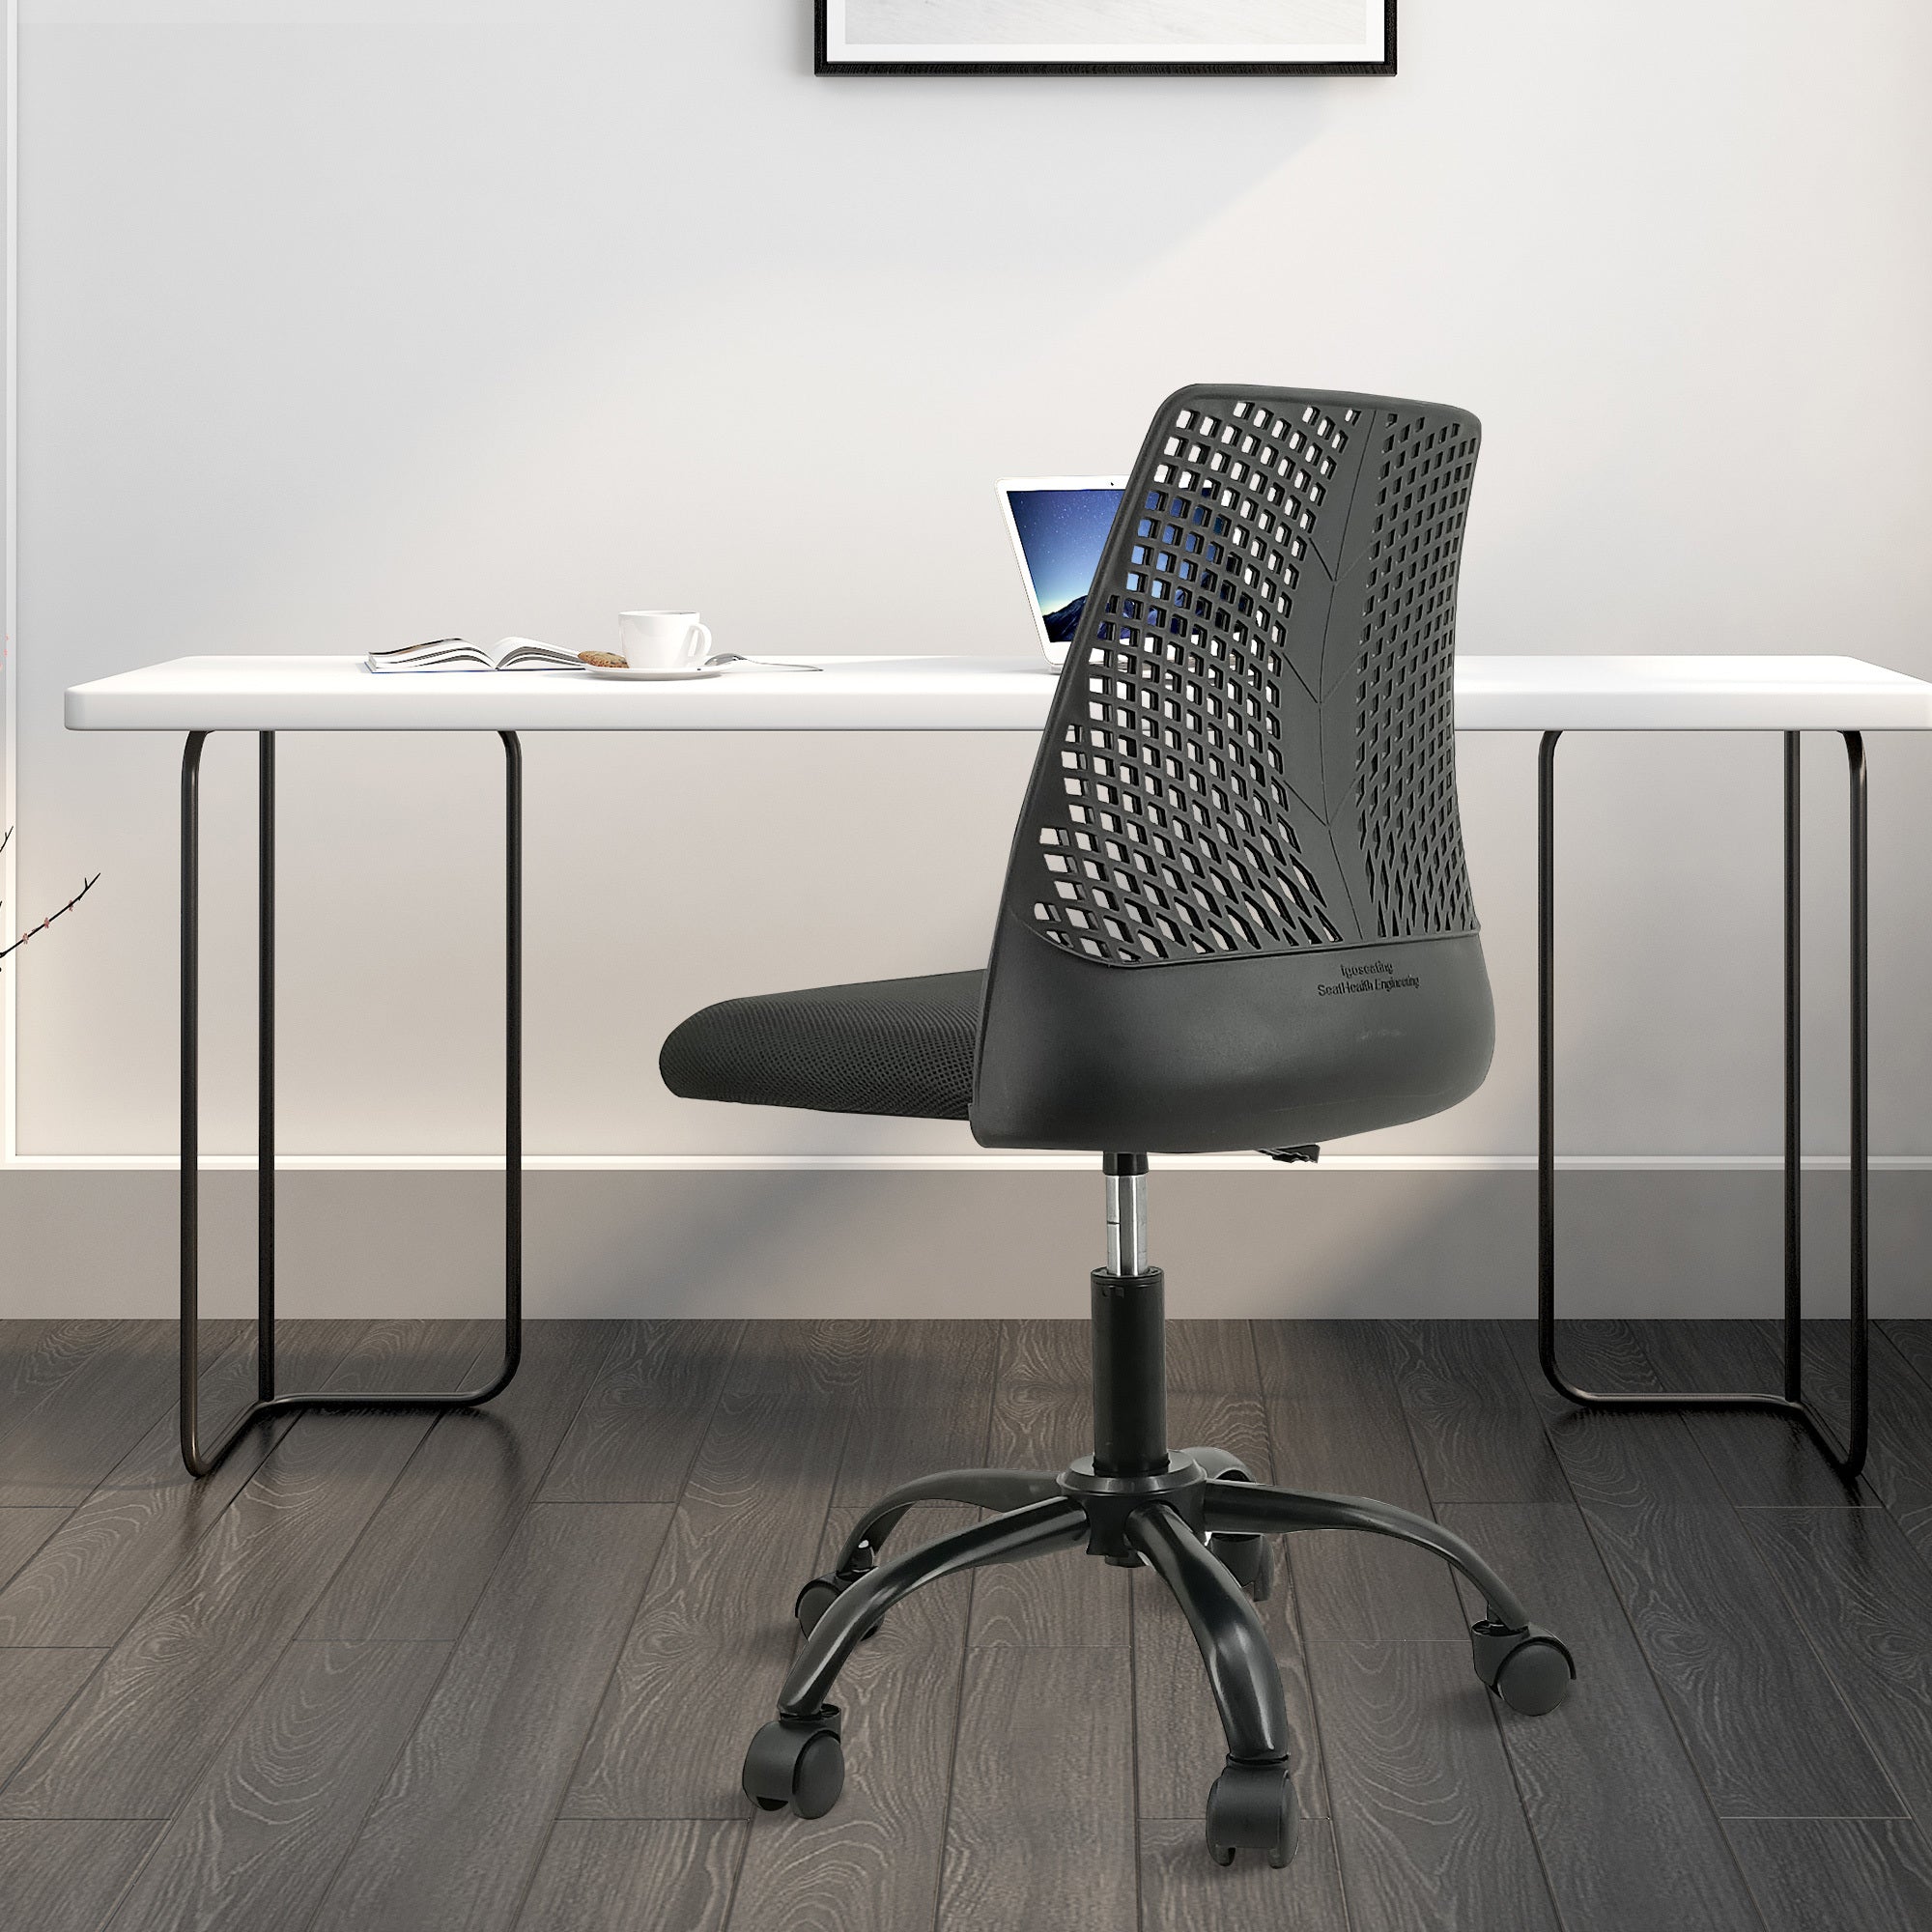 Ergonomic Office and Home Chair with Supportive black-modern-foam-fabric